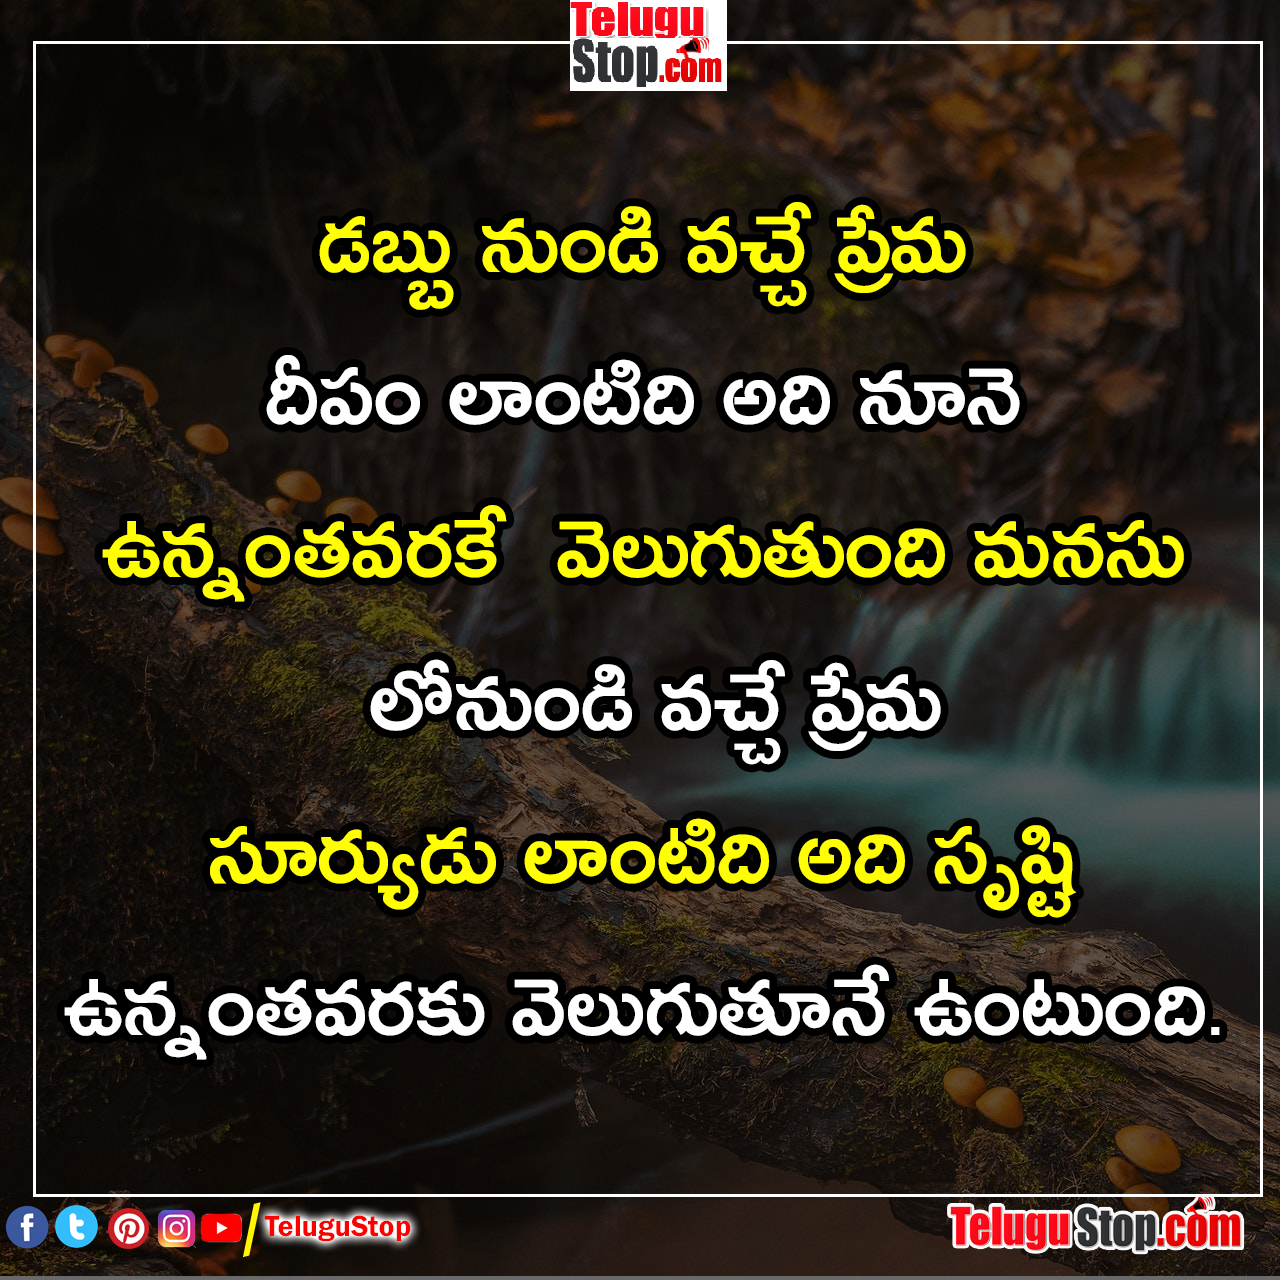 The love that comes to mind is pure quotes in telugu inspirational Quote